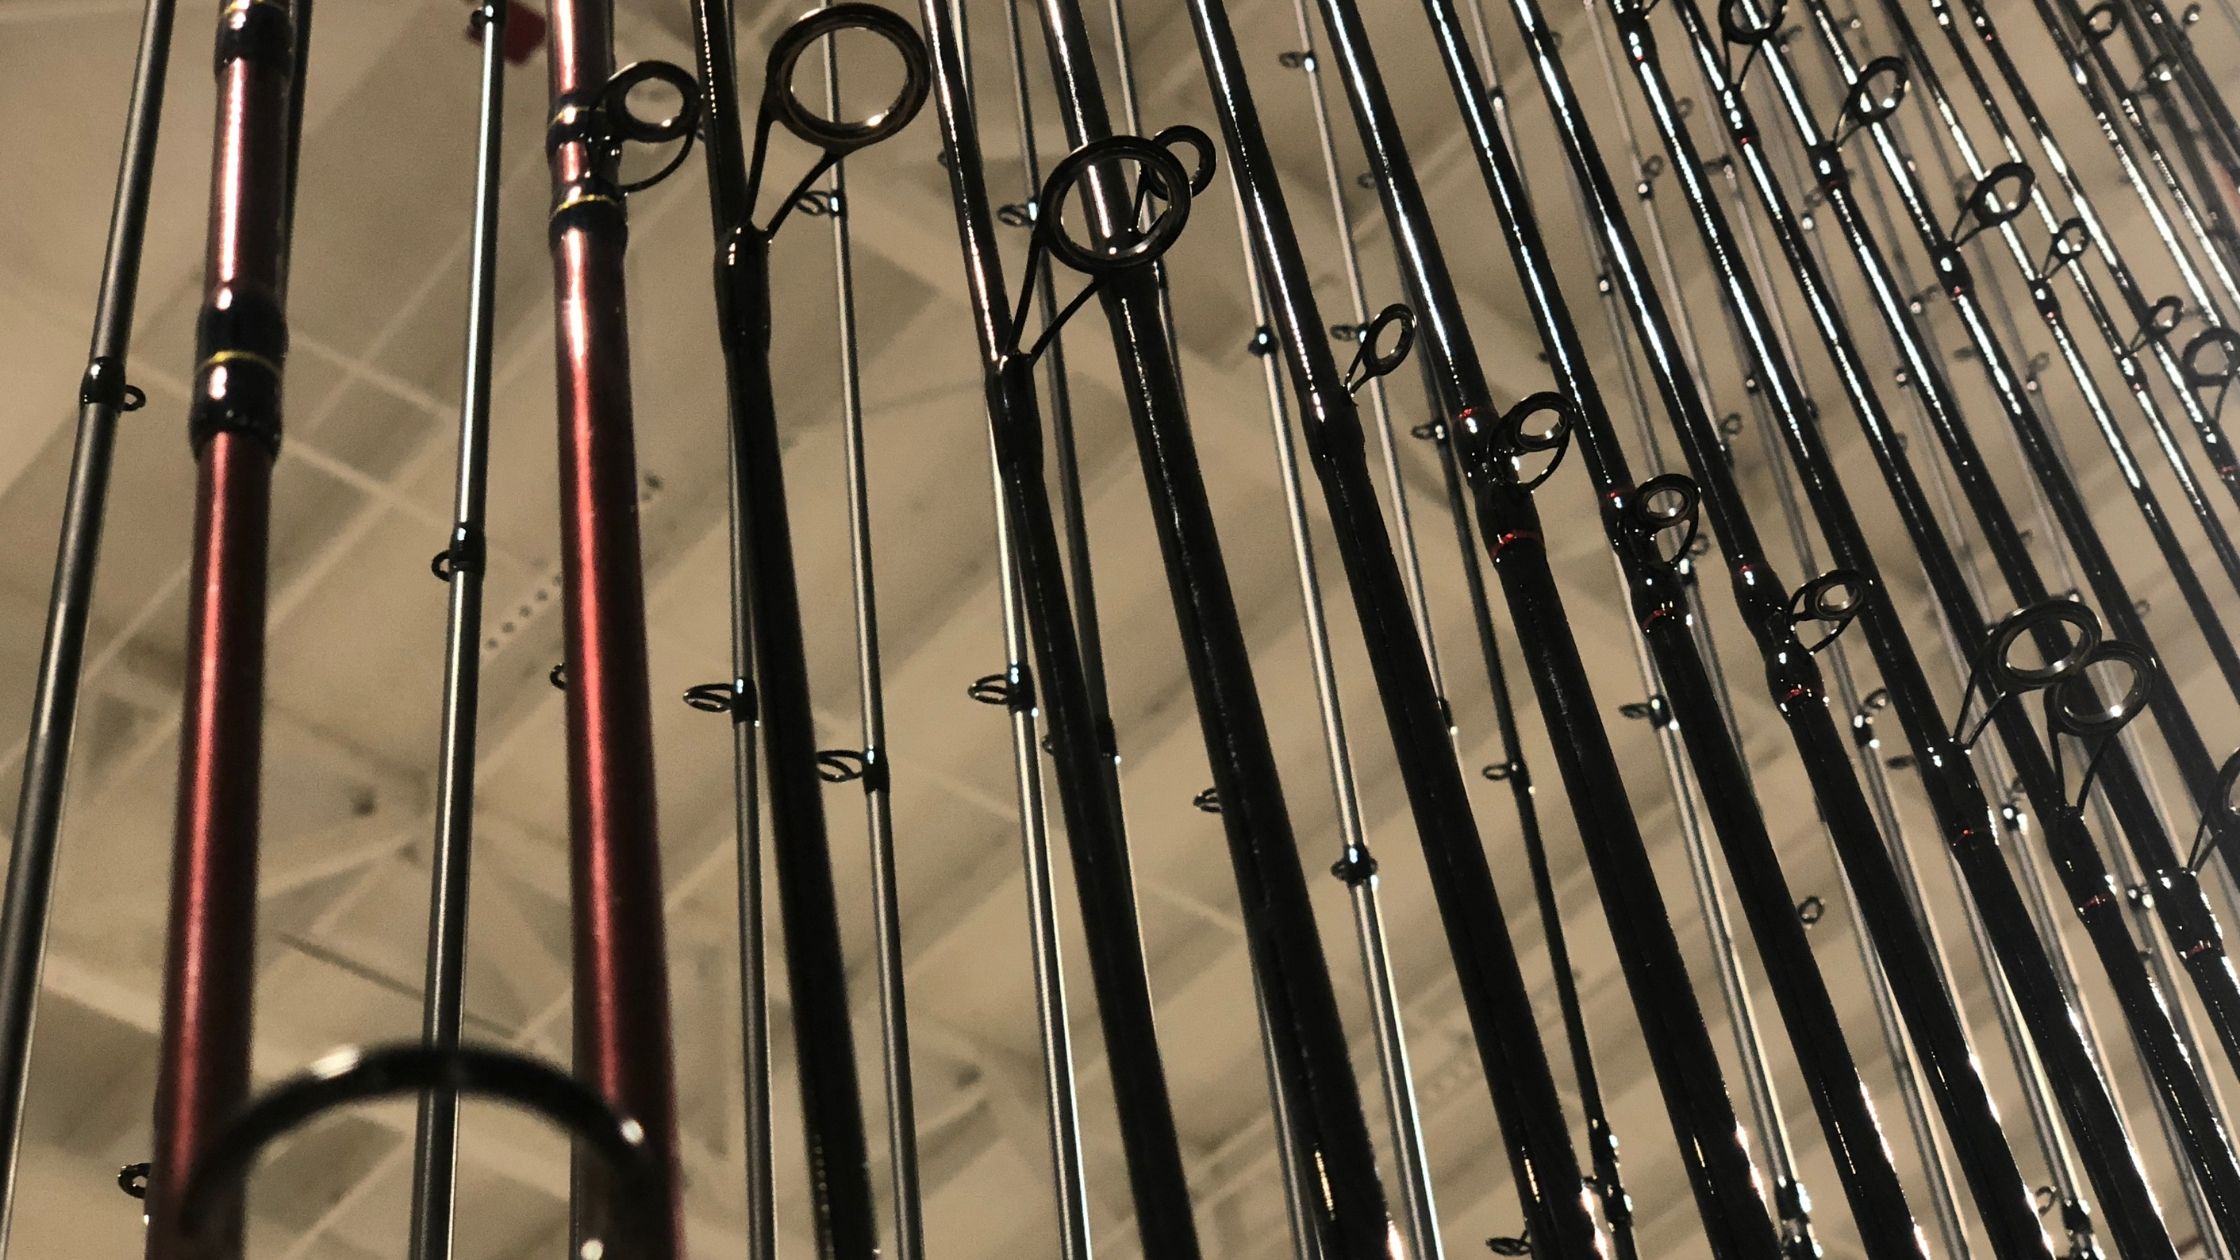 Types of Fishing Poles: Composite Fishing Poles